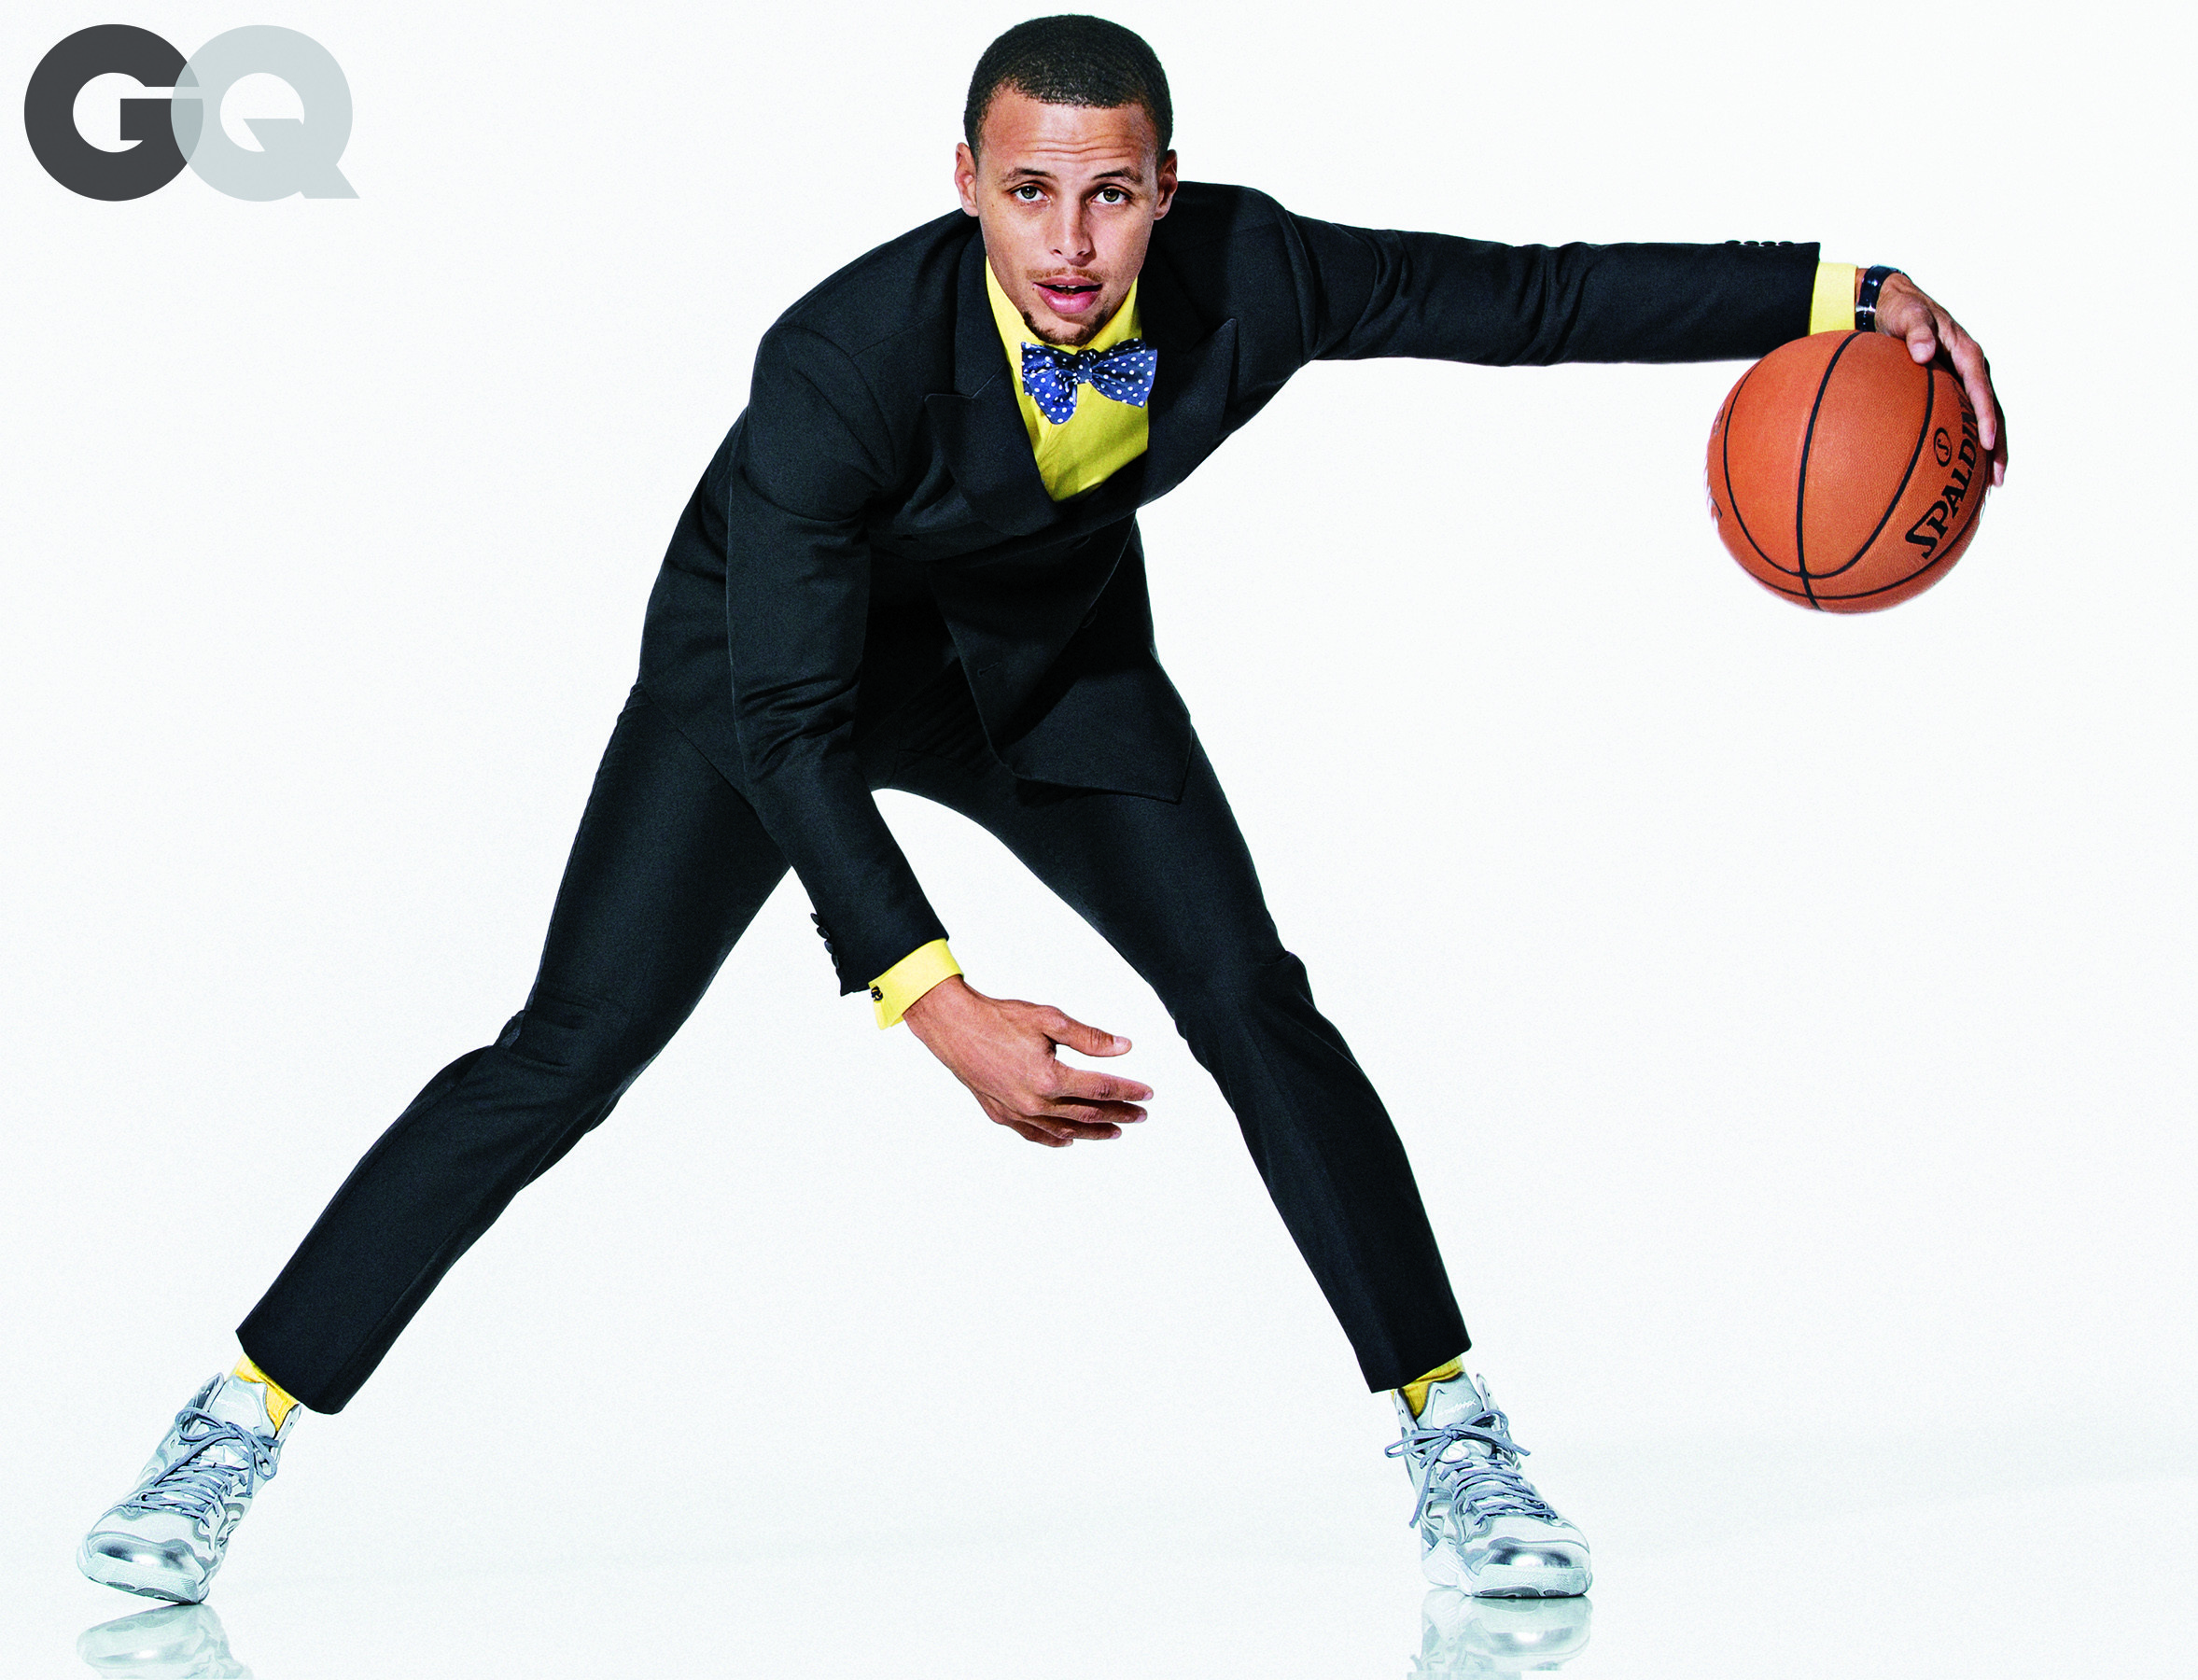 2355x1800 NBA Fashion: Stephen Curry and Co. Go Hipster Black Tie in GQ Magazine (